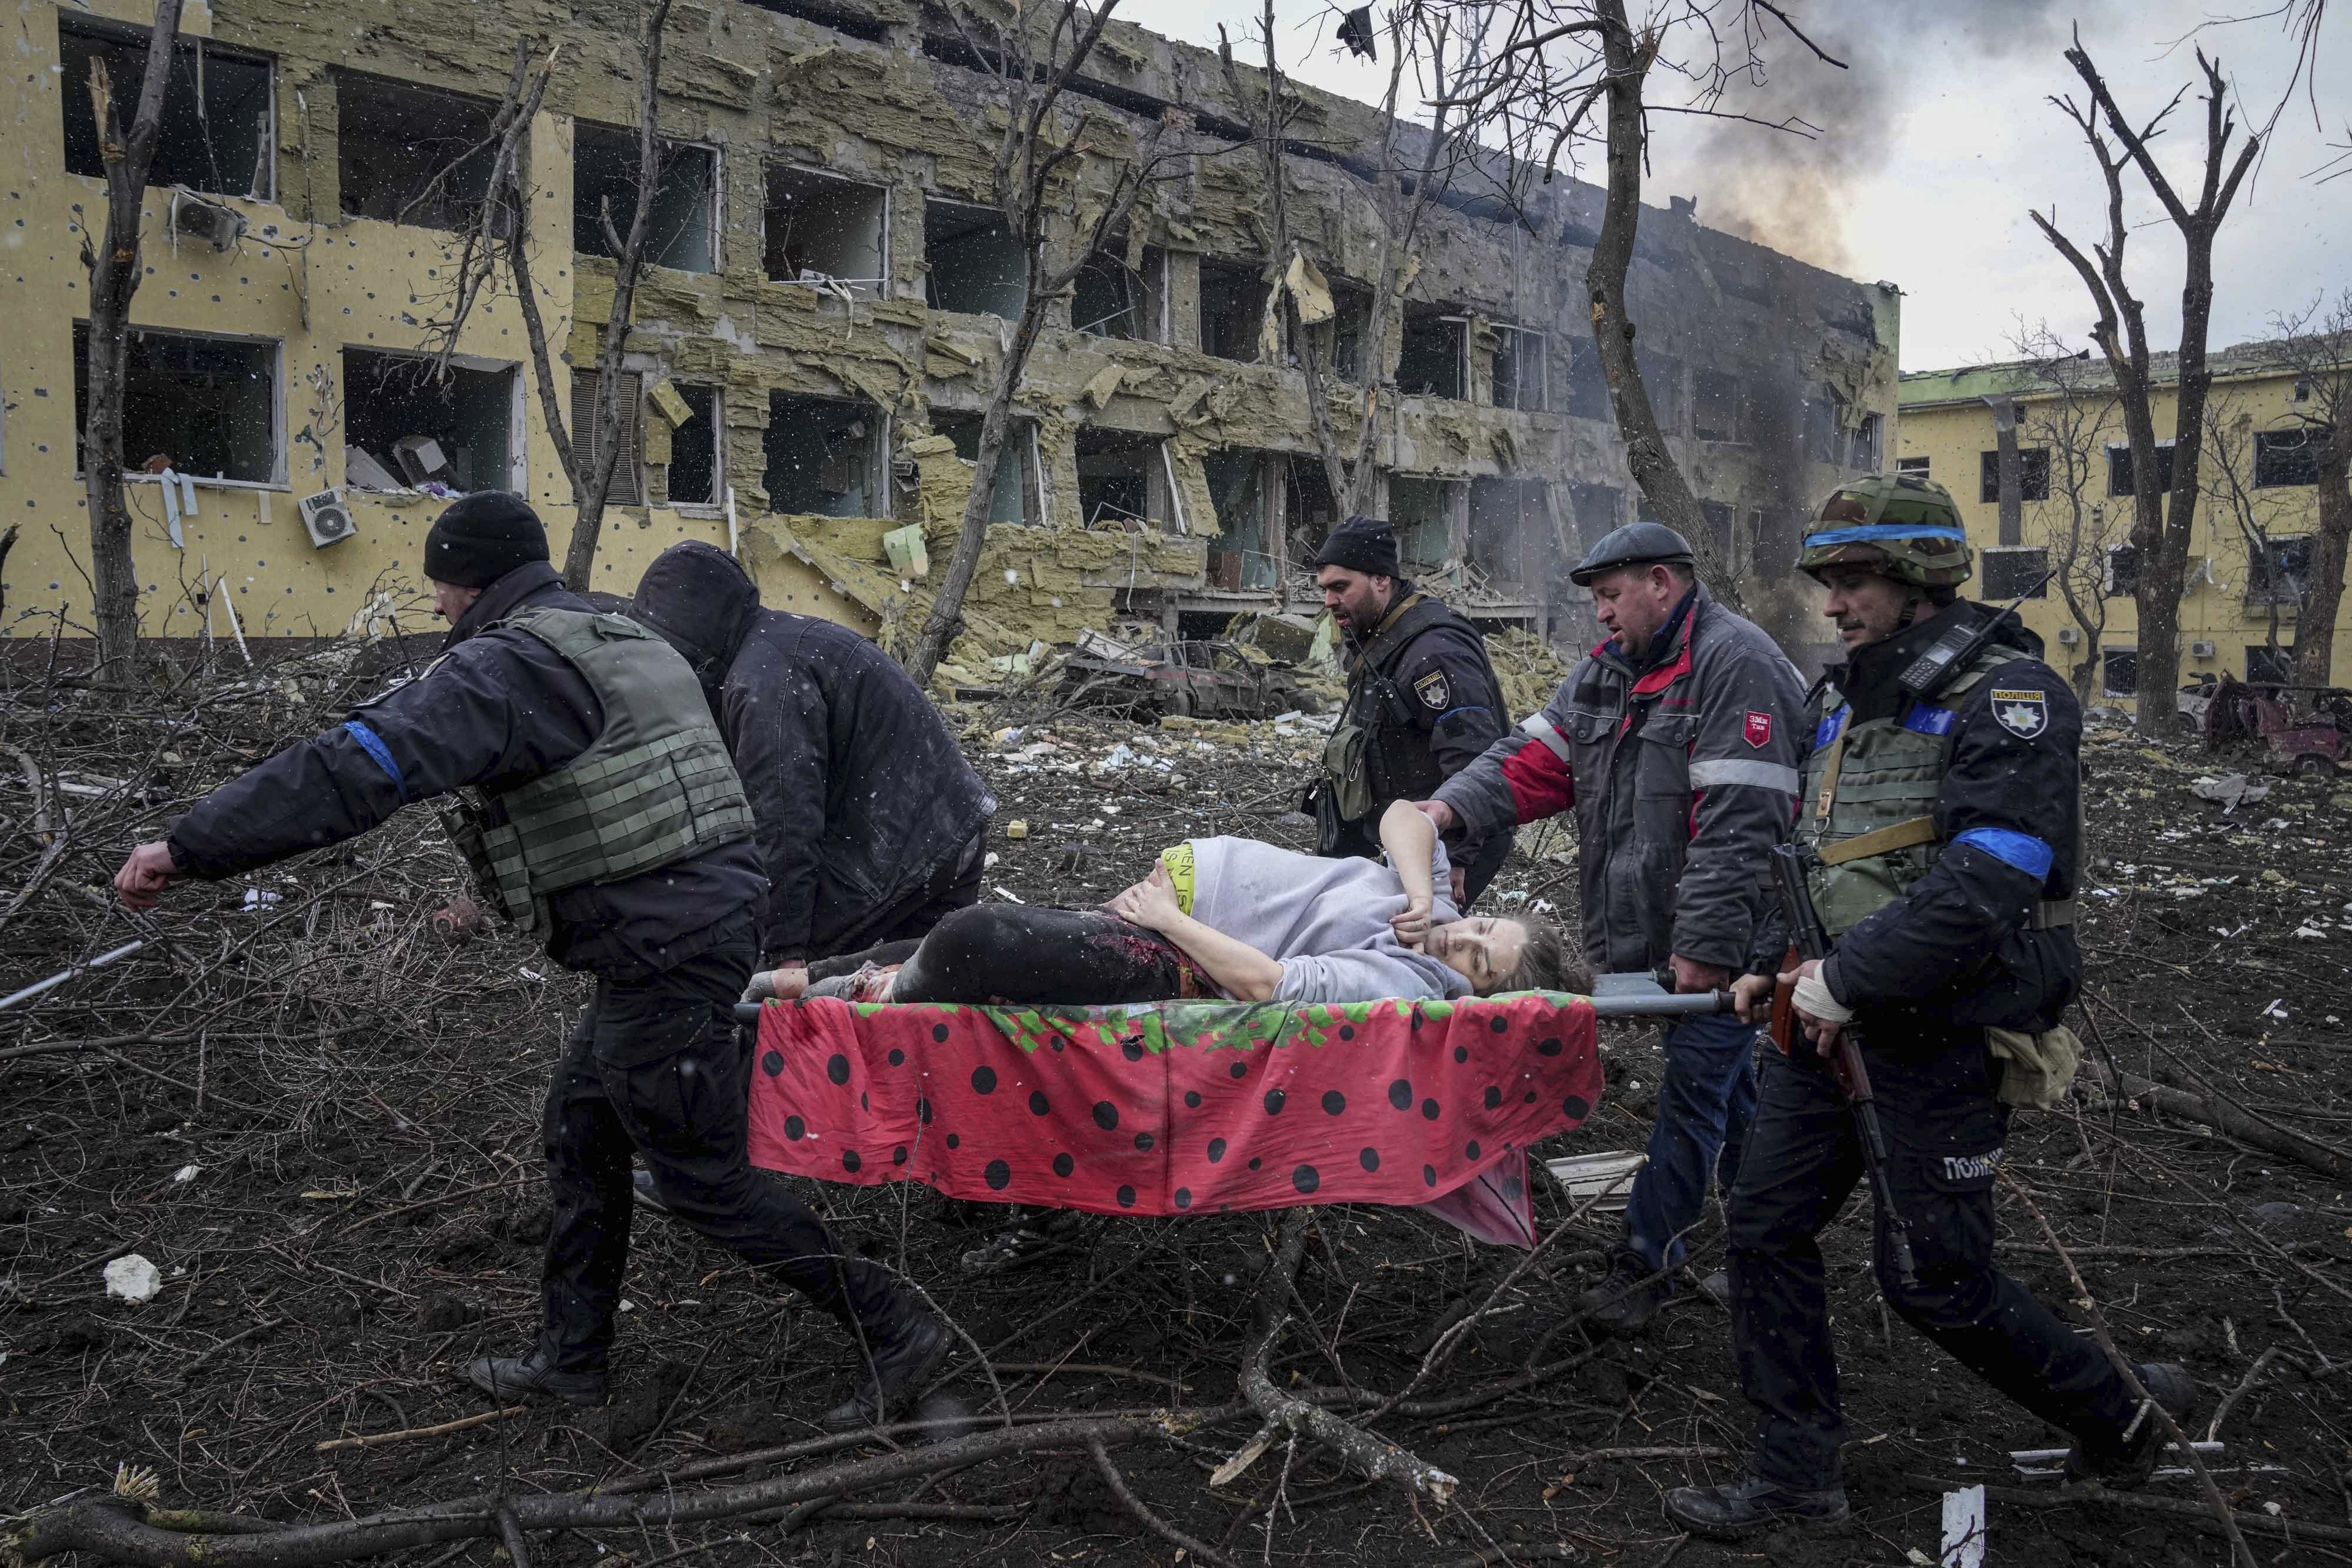 Ukrainian emergency employees and volunteers carry an injured pregnant woman from a maternity hospital that was damaged by shelling / © Associated Press